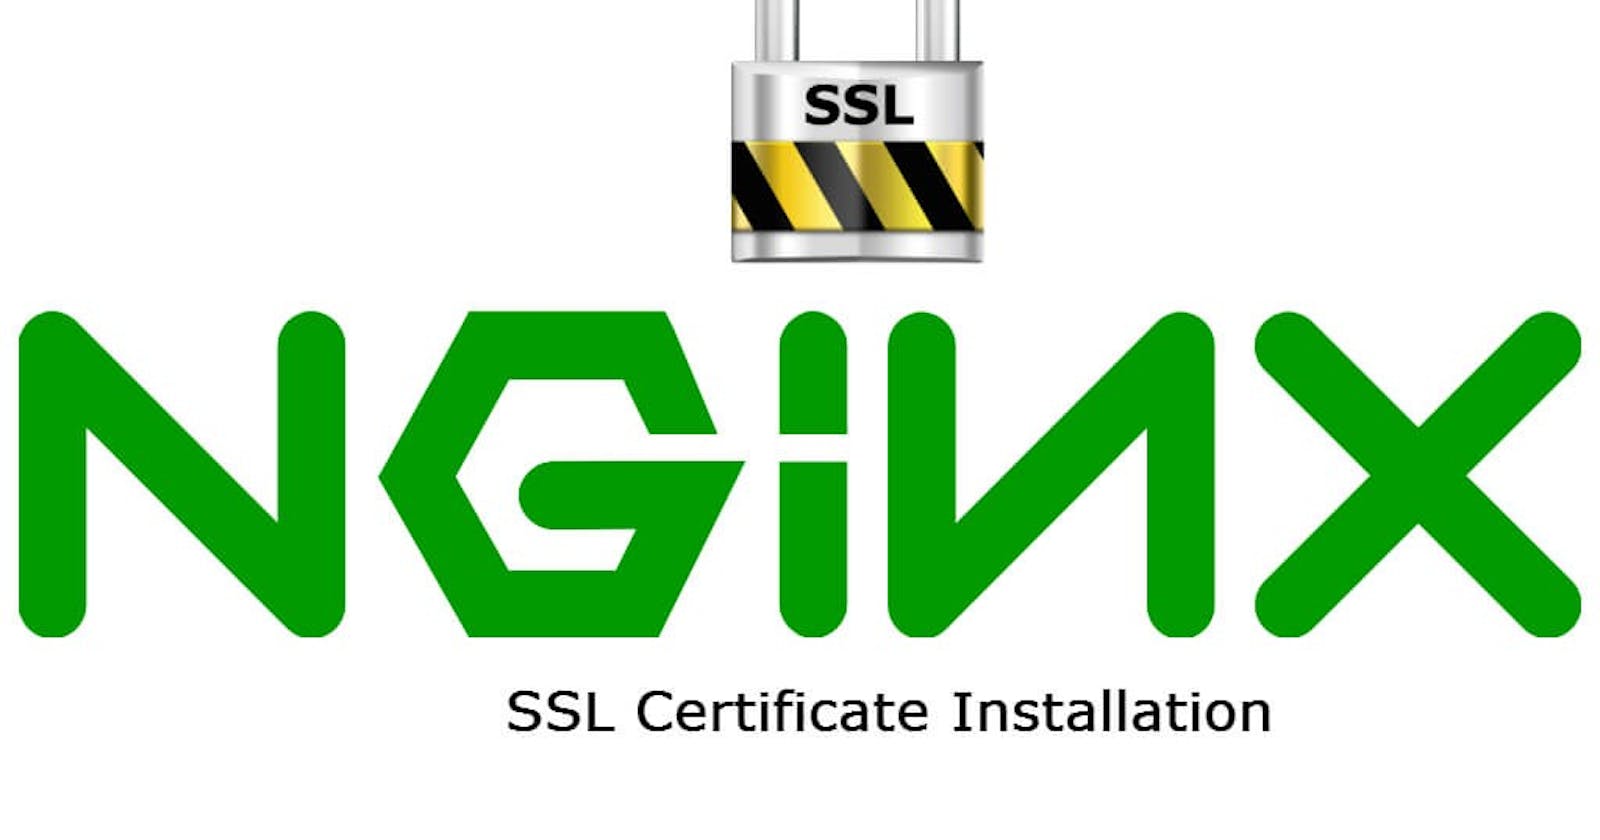 How to Secure Your Website with Nginx SSL/TLS Setup